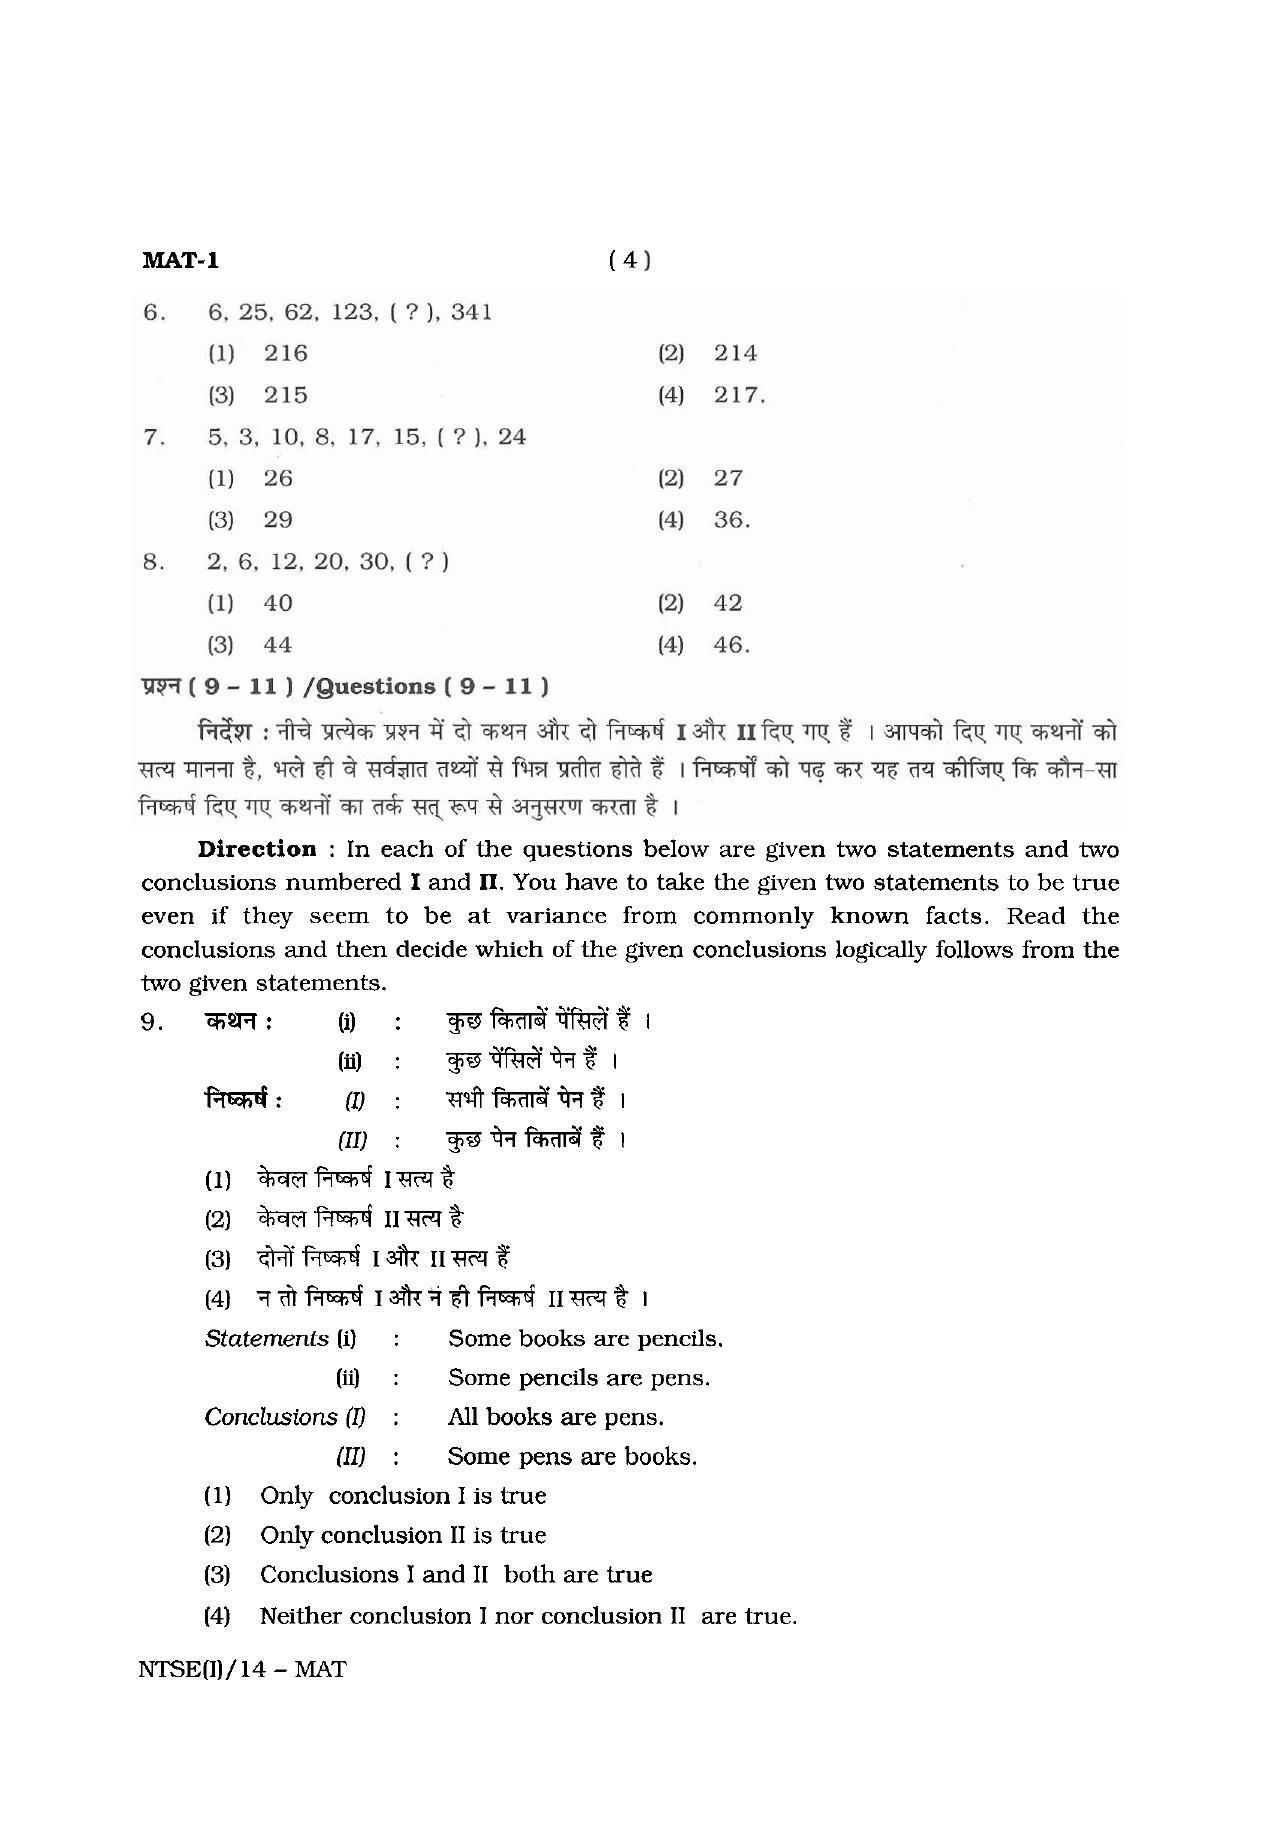 NTSE 2014 (Stage II) MAT Question Paper - Page 4